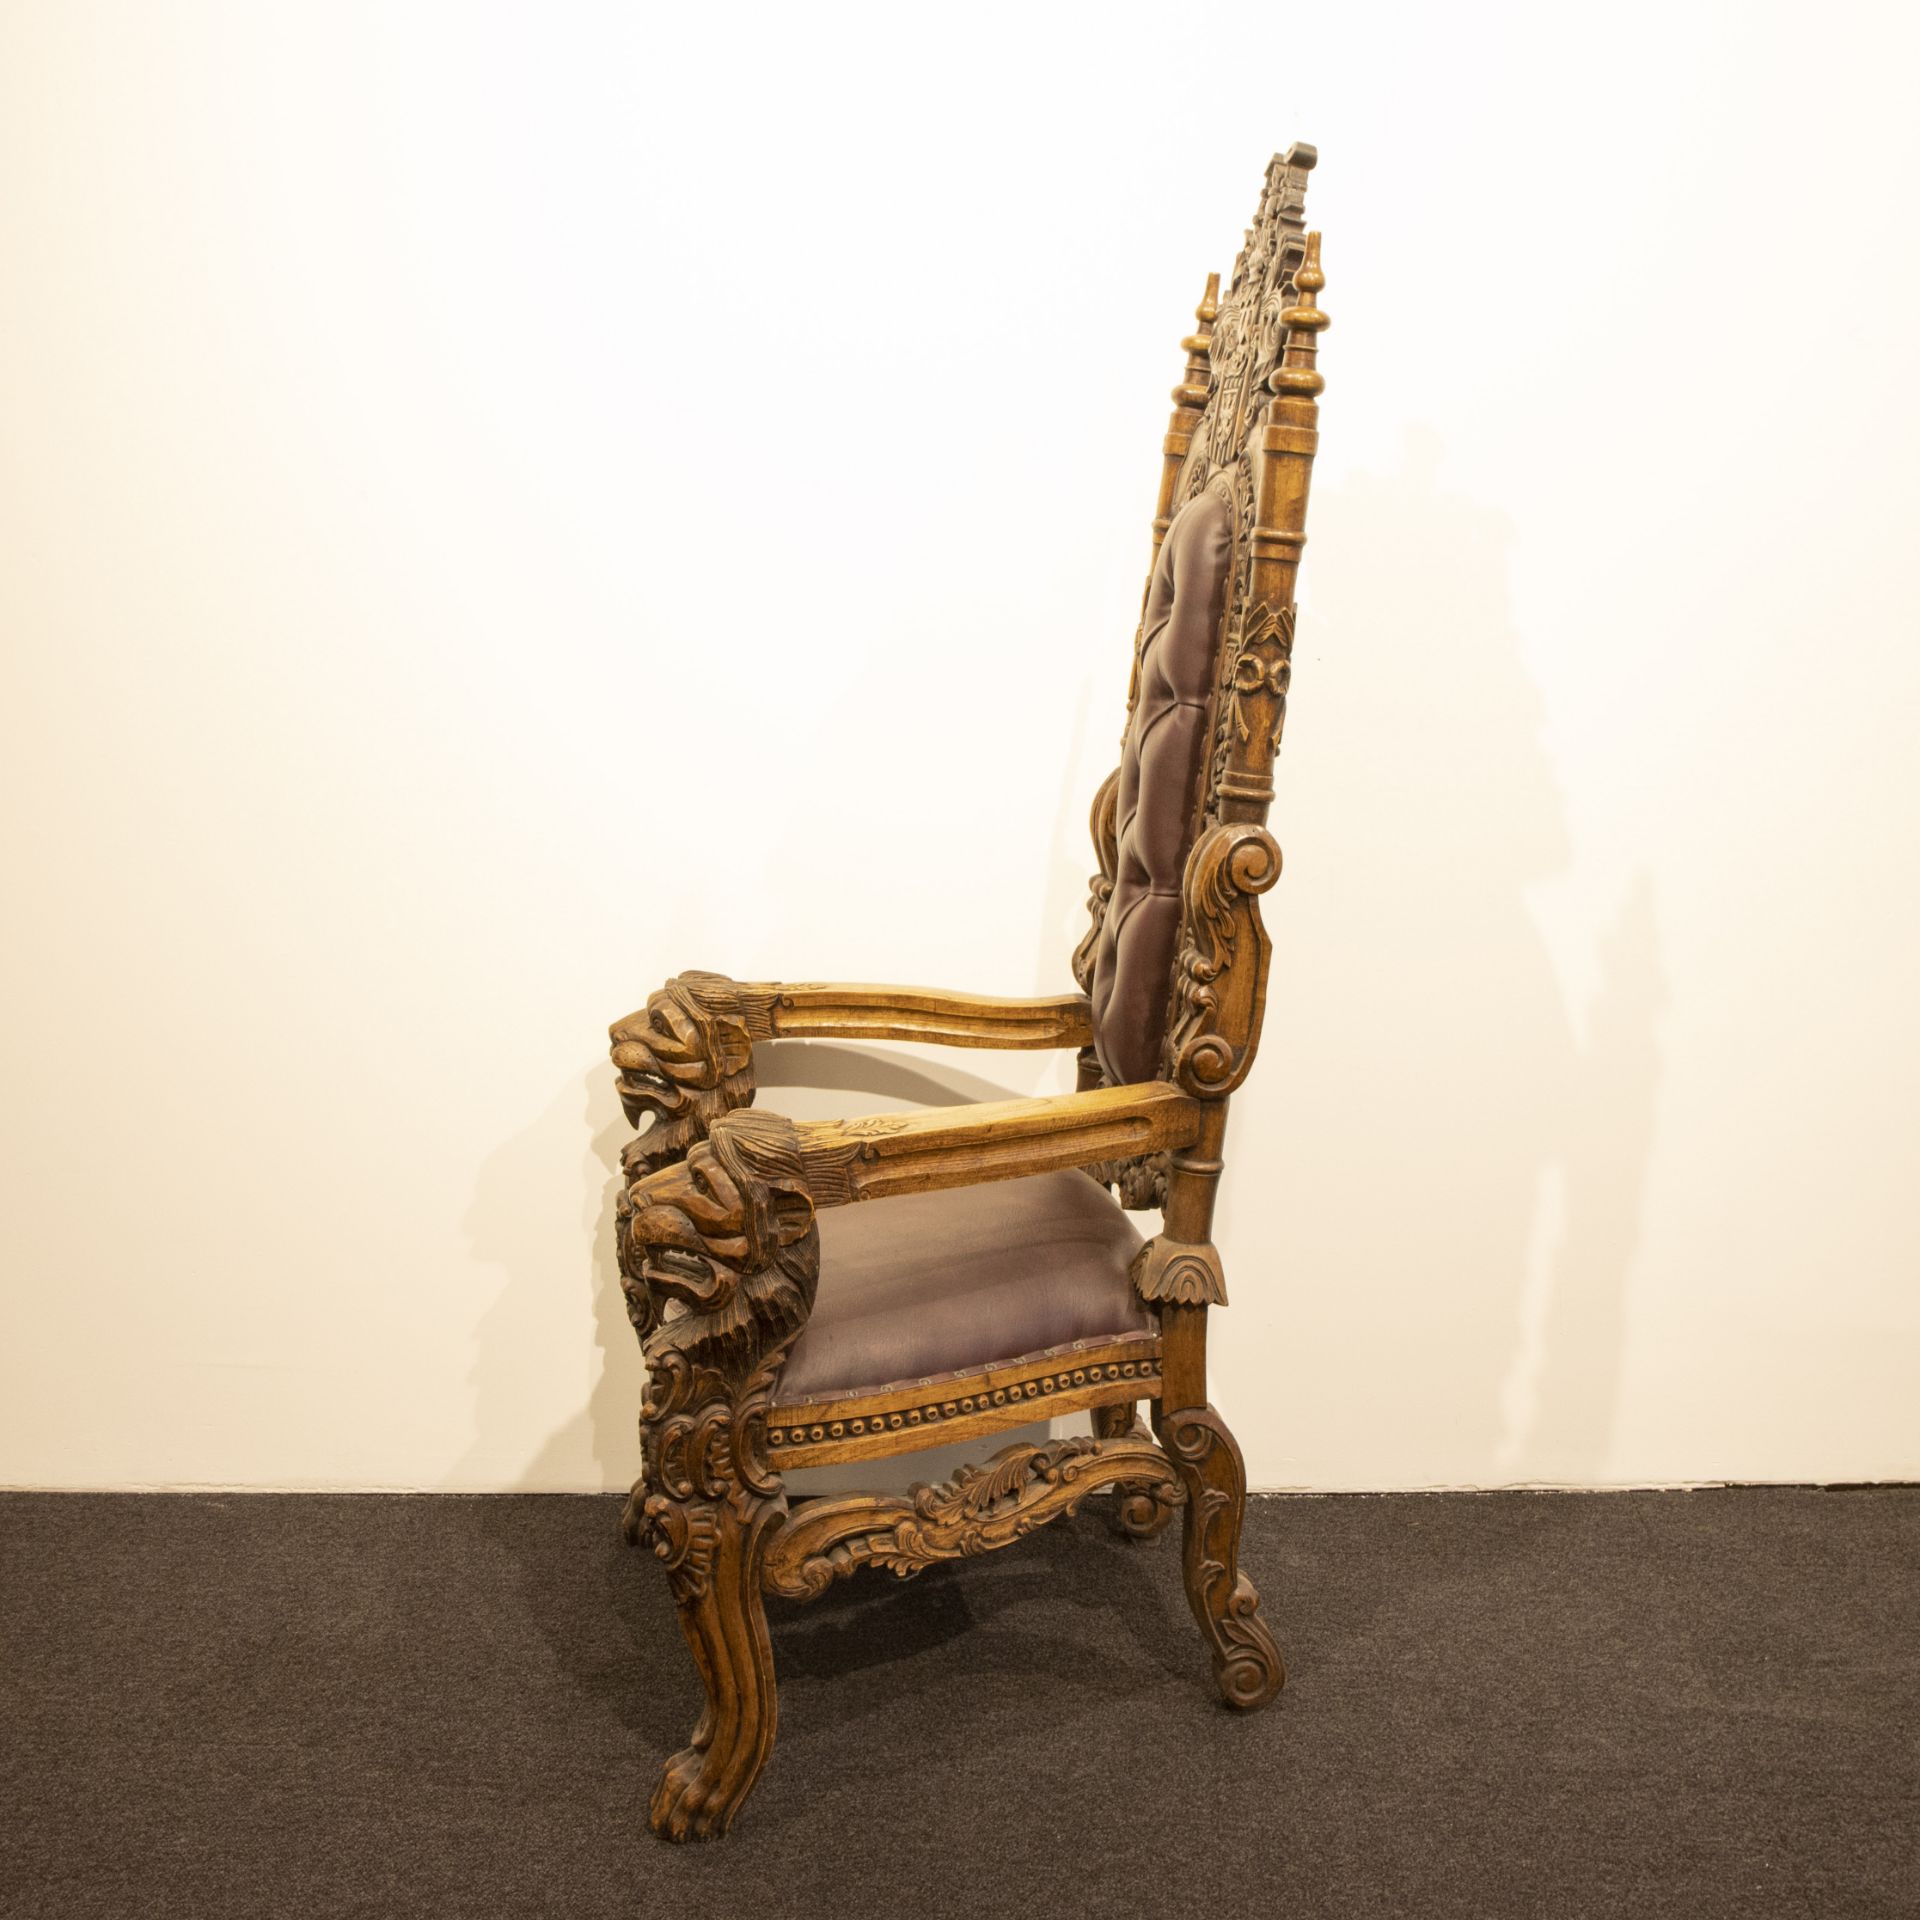 Castle arm chair sculpted with lion heads - Image 4 of 6